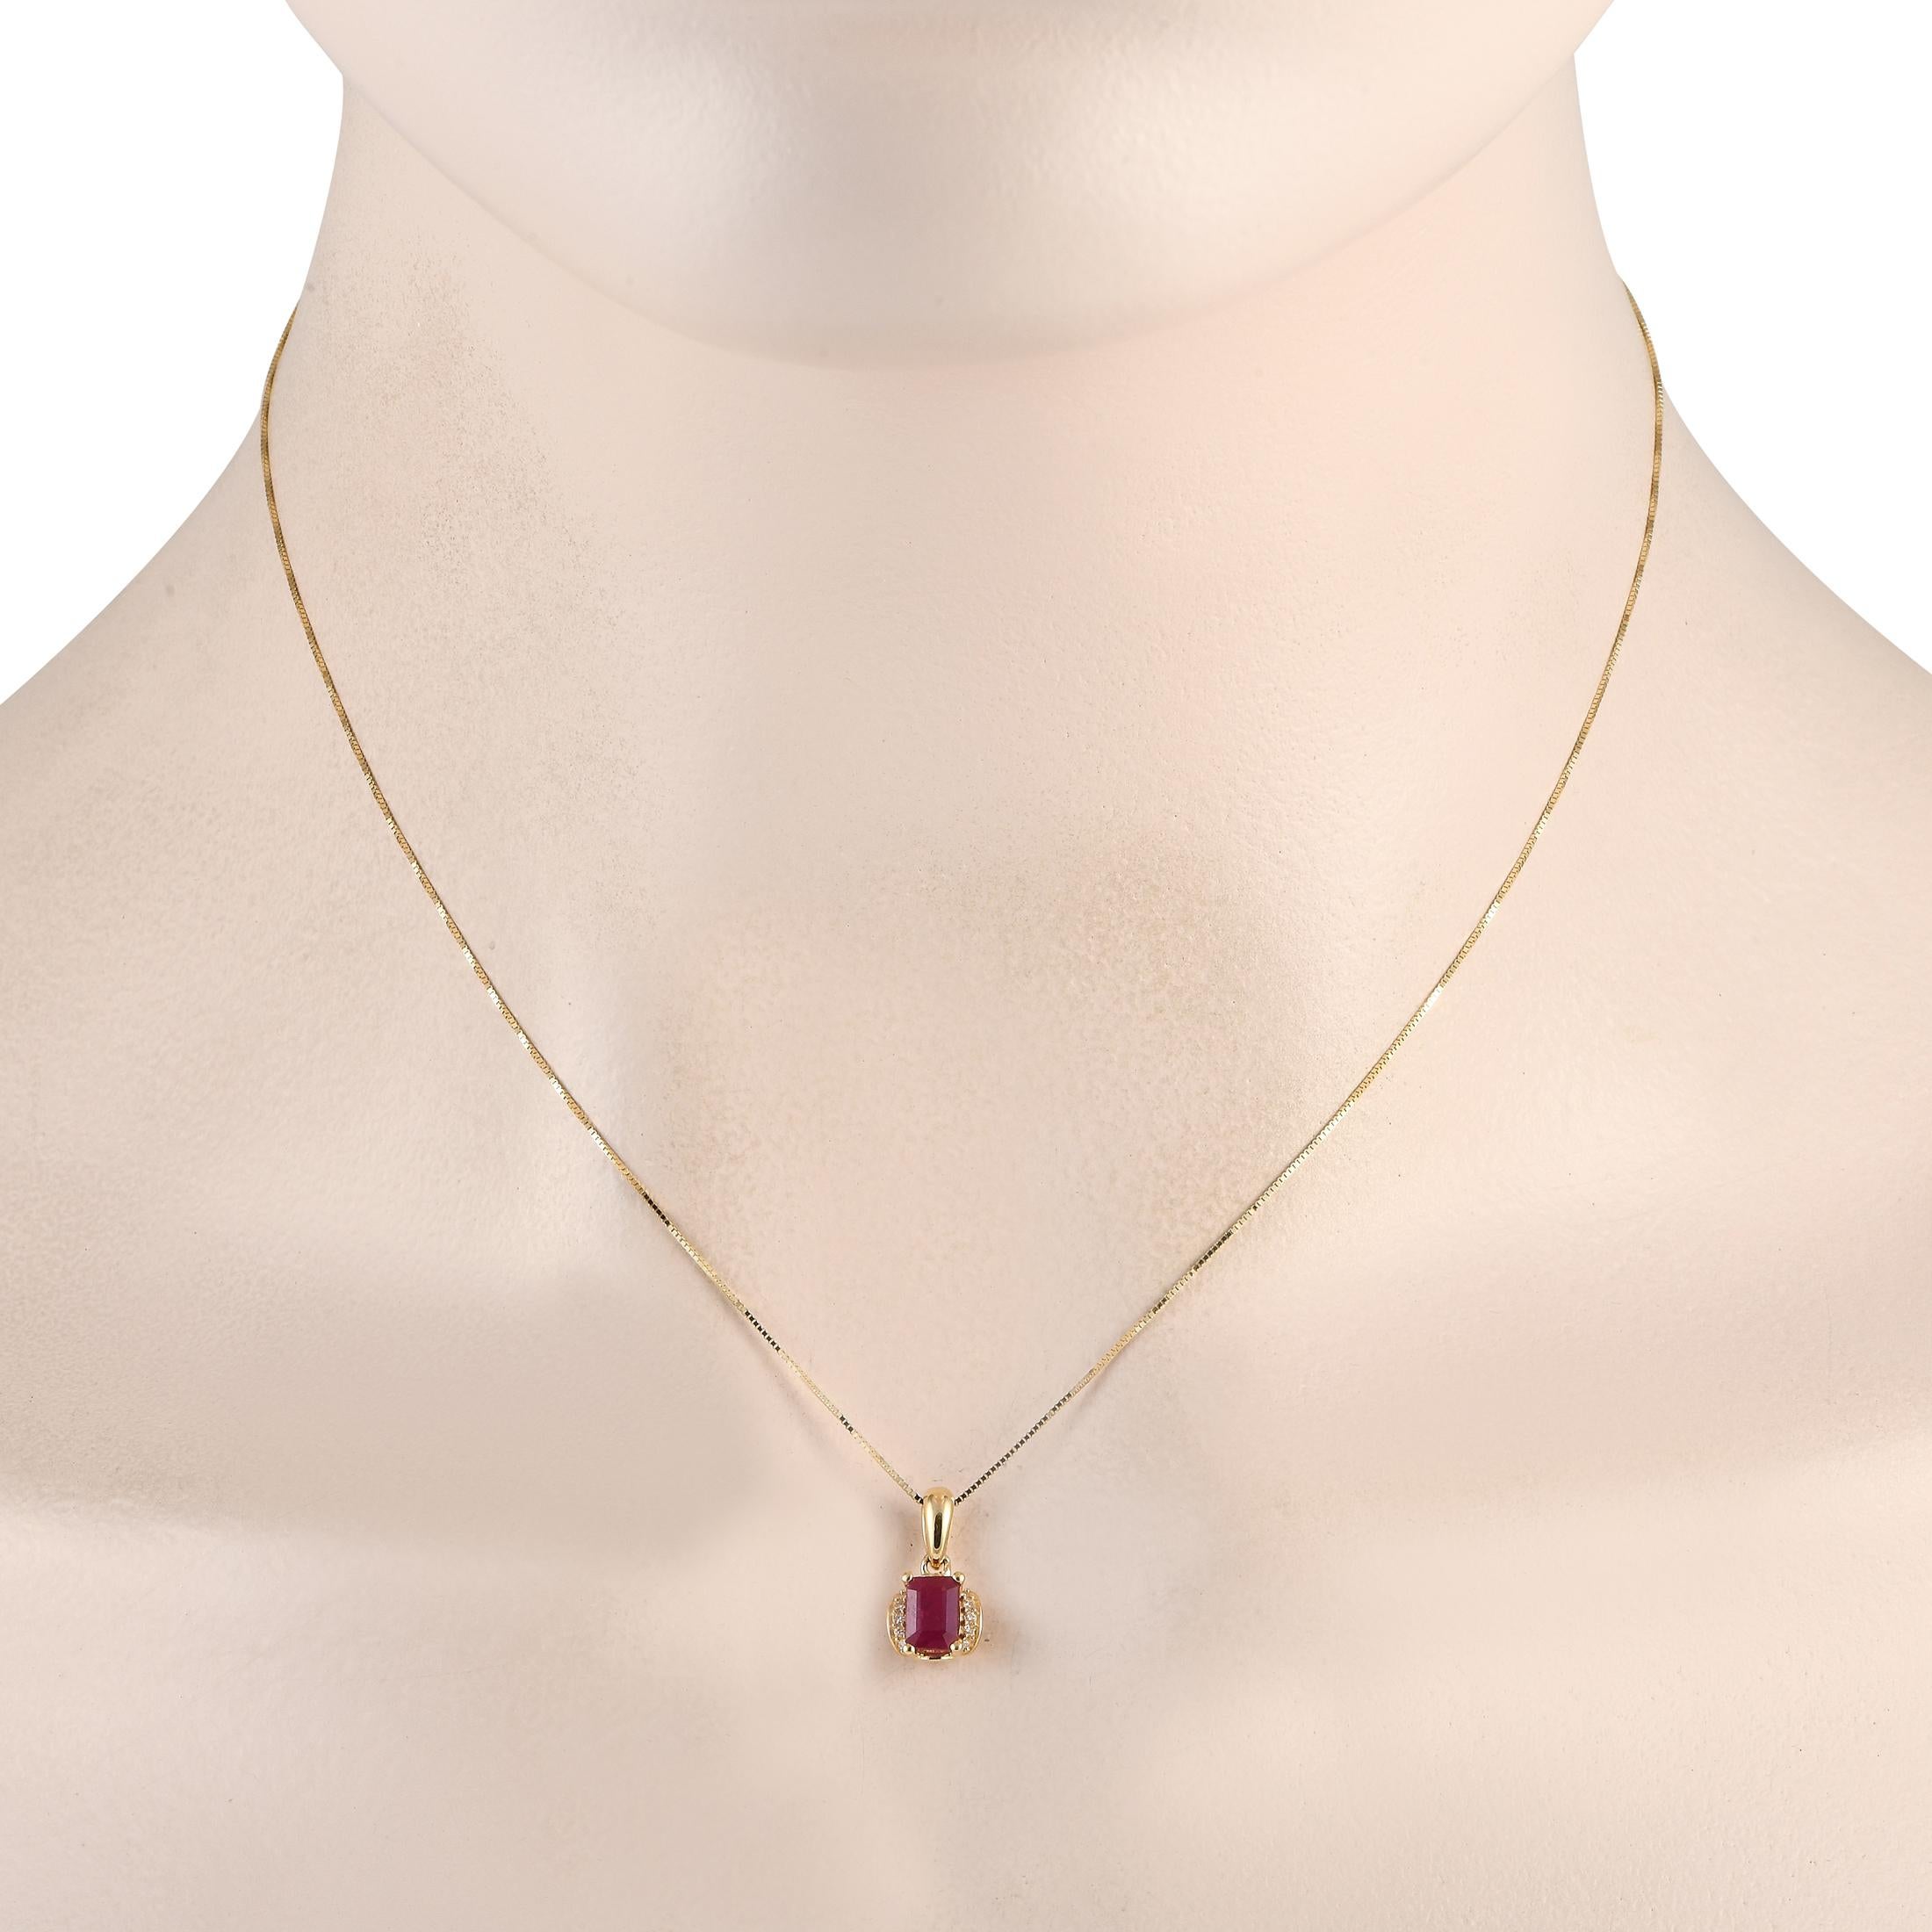 A radiant Ruby gemstone serves as a stunning focal point on this impeccably crafted 14K Yellow Gold necklace. Suspended from an 18 chain, youll find a simple, elegant pendant measuring 0.50 long by 0.25 wide. Diamonds with a total weight of 0.03